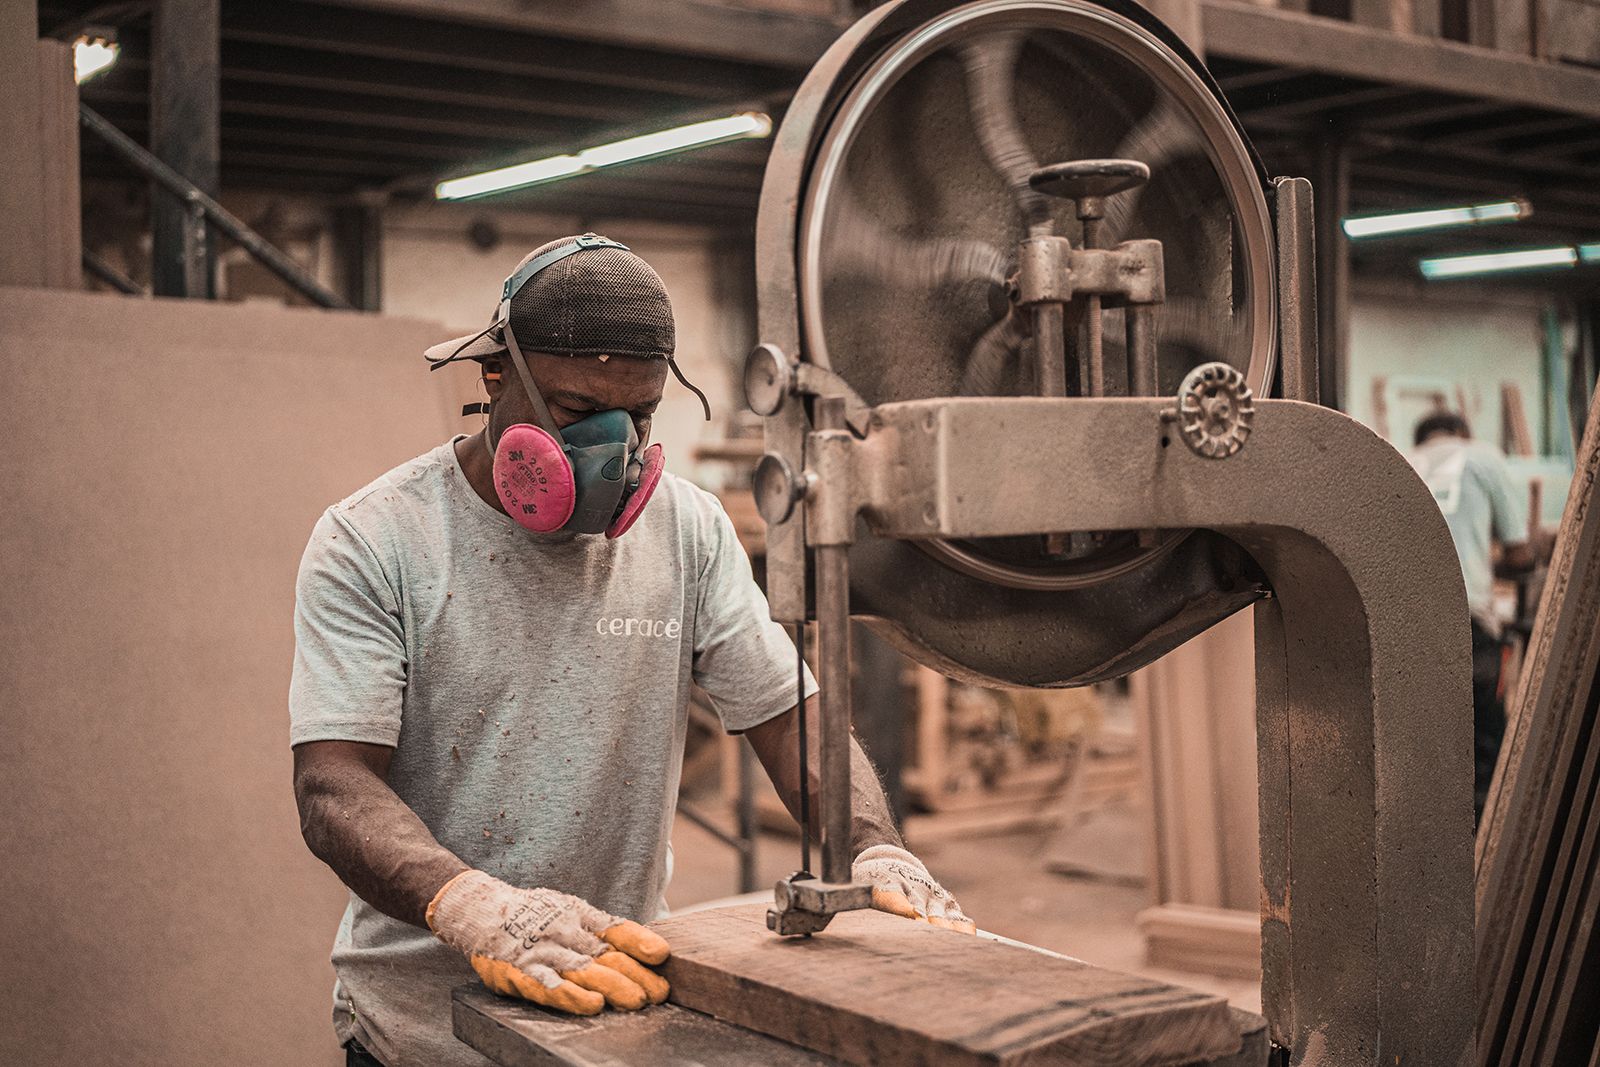 Worker using band saw to cut wood in a heavily dusty environment